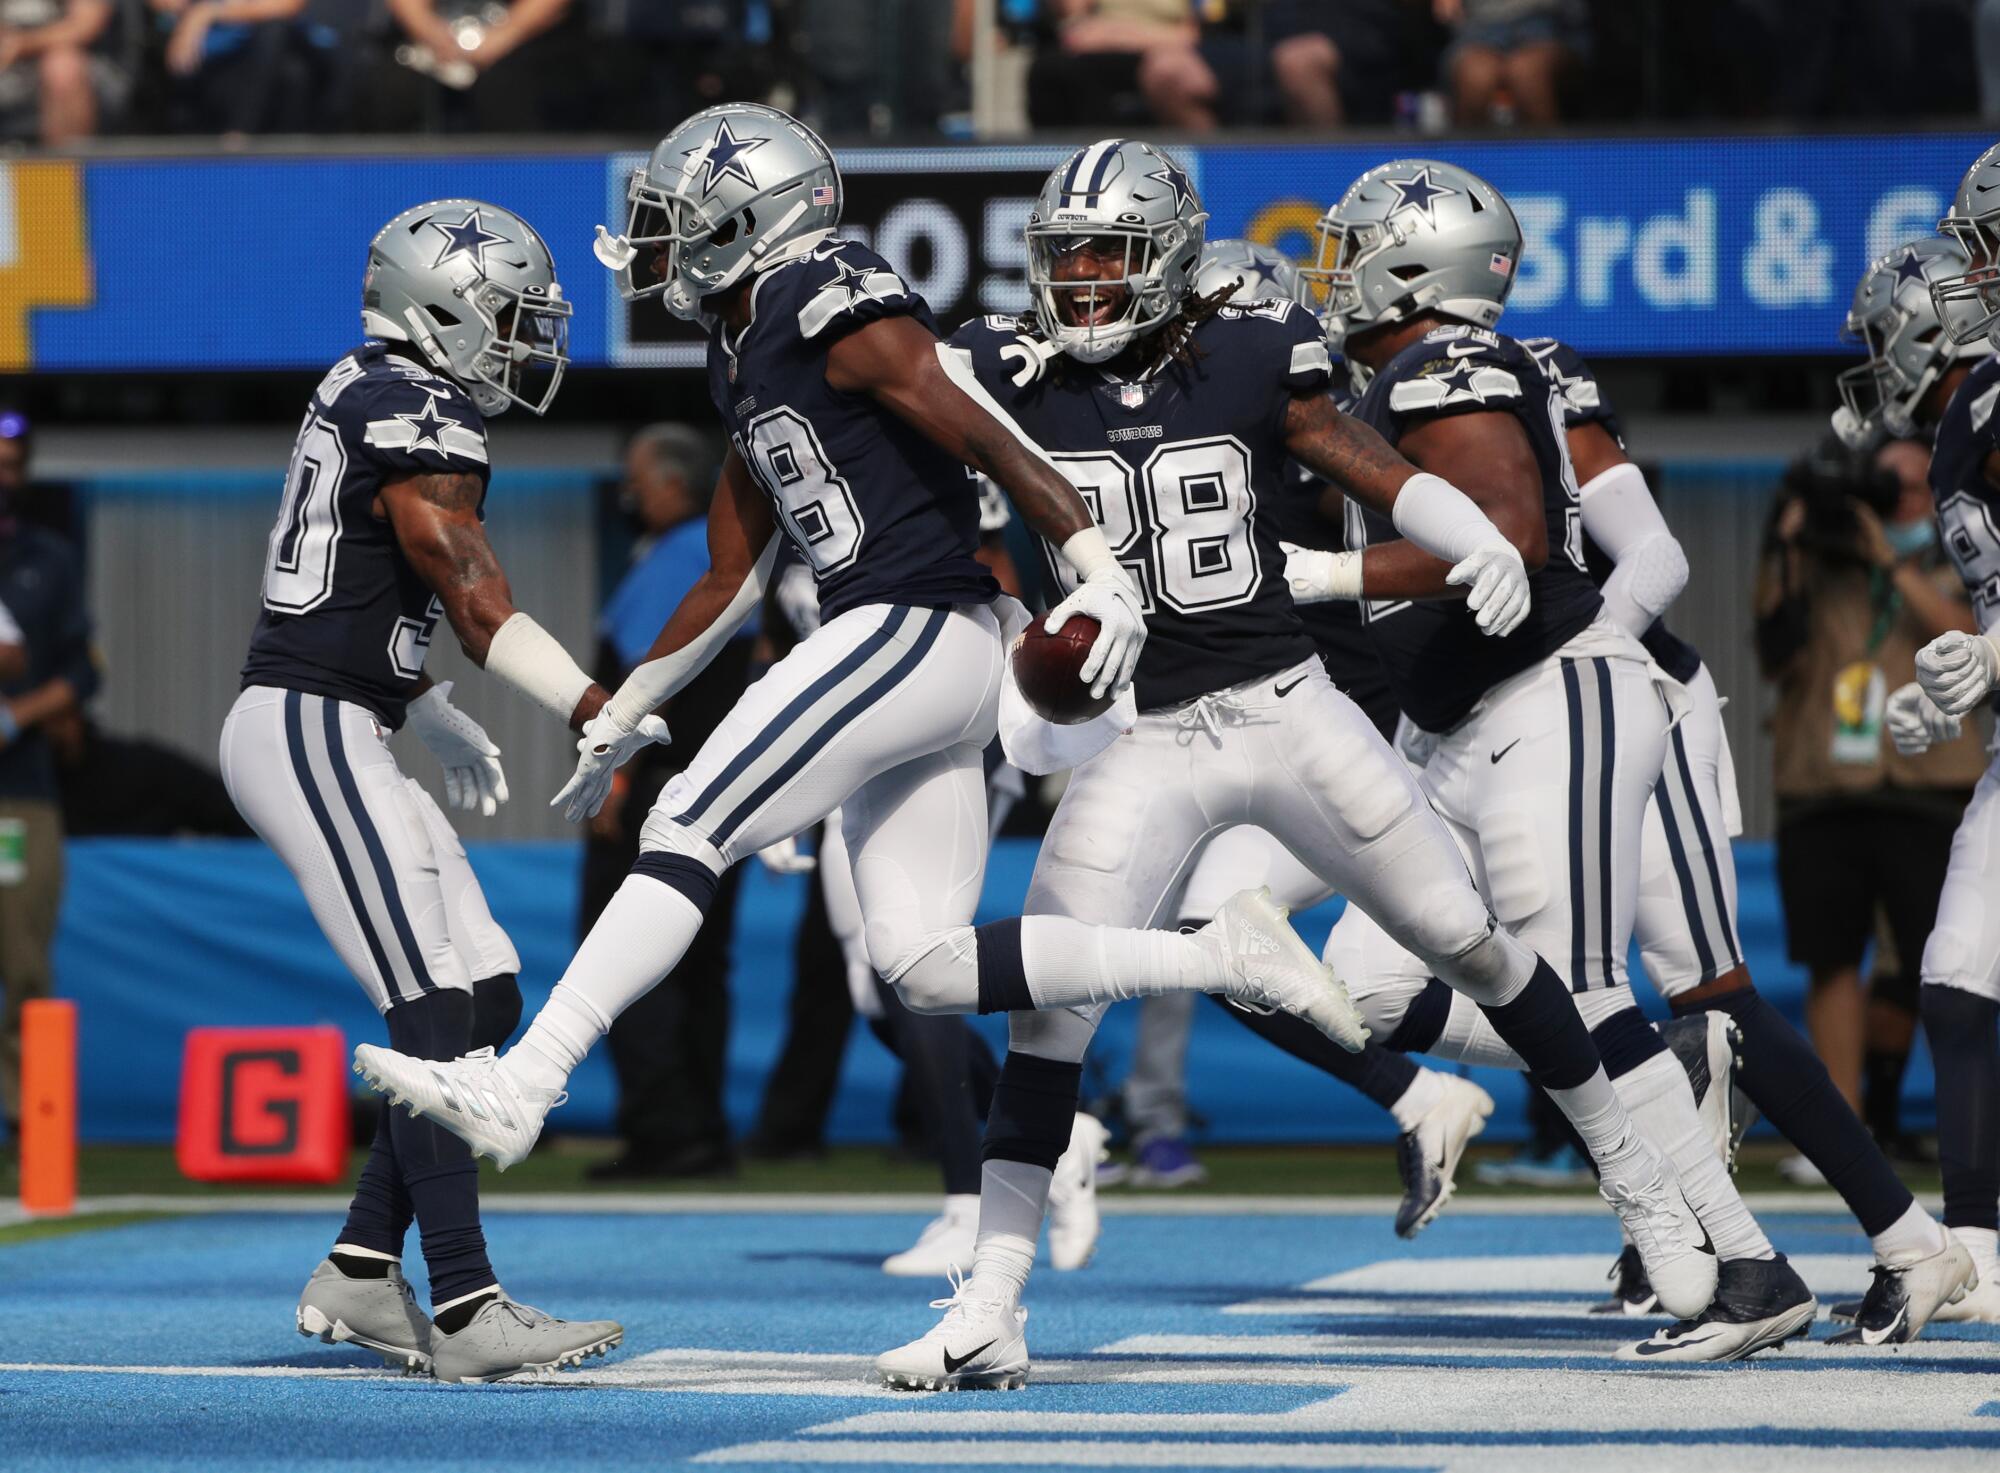 NFL photos: Cowboys defeat Chargers in SoFi Stadium thriller - Los